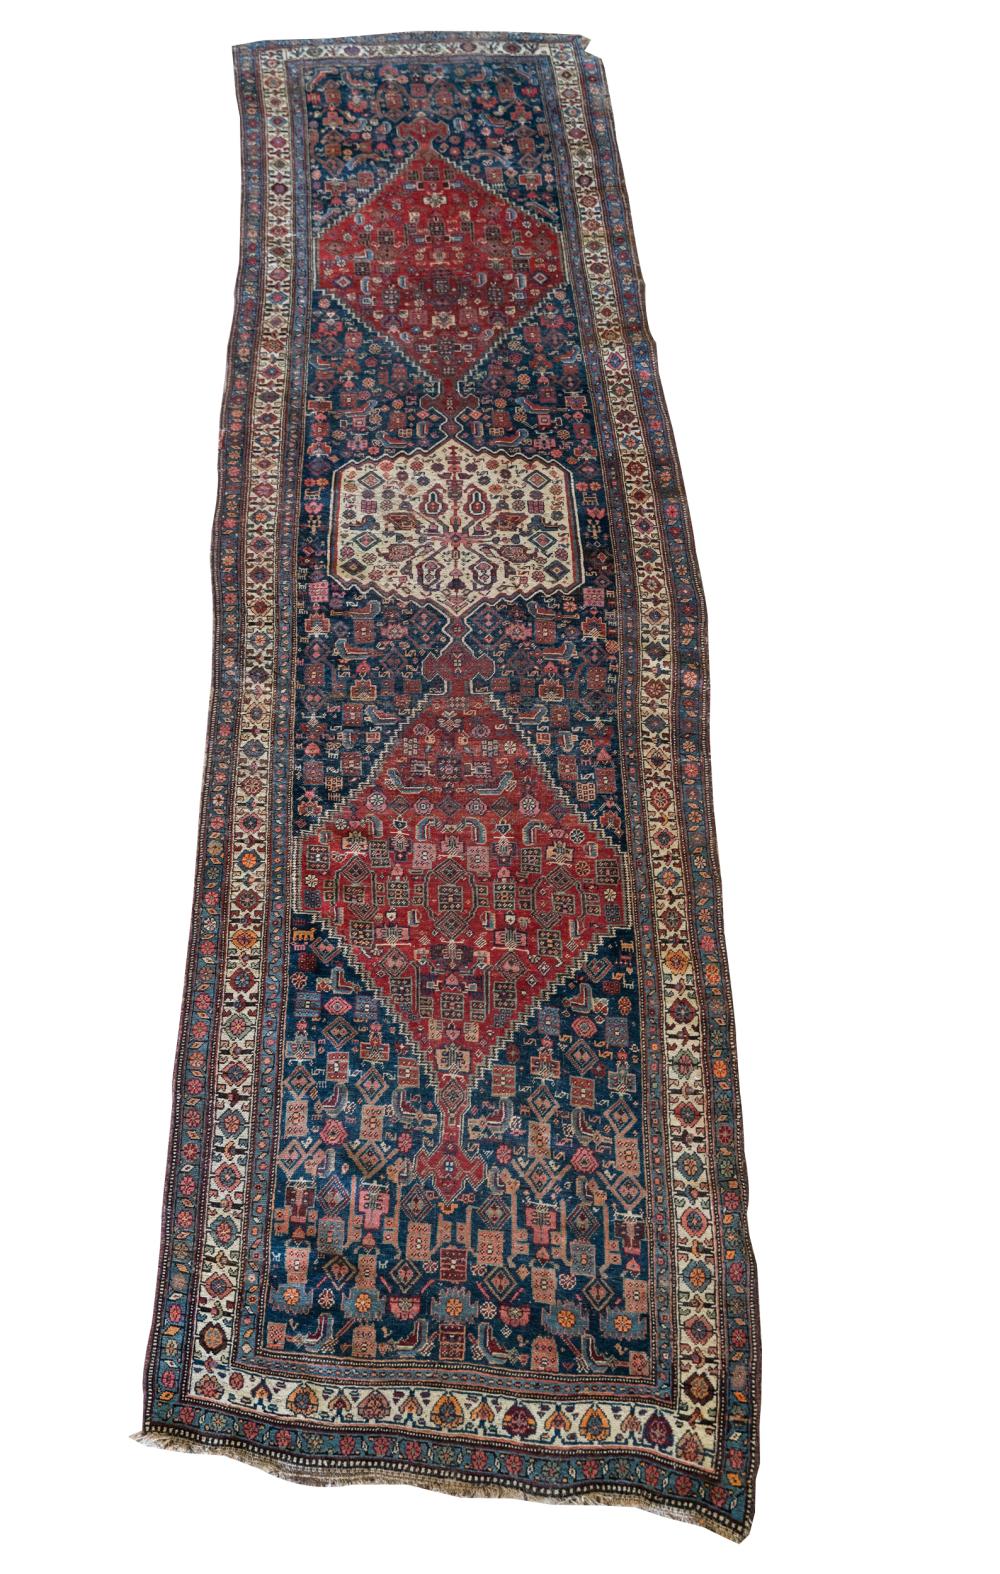 PERSIAN RUNNER RUGwool; Condition: